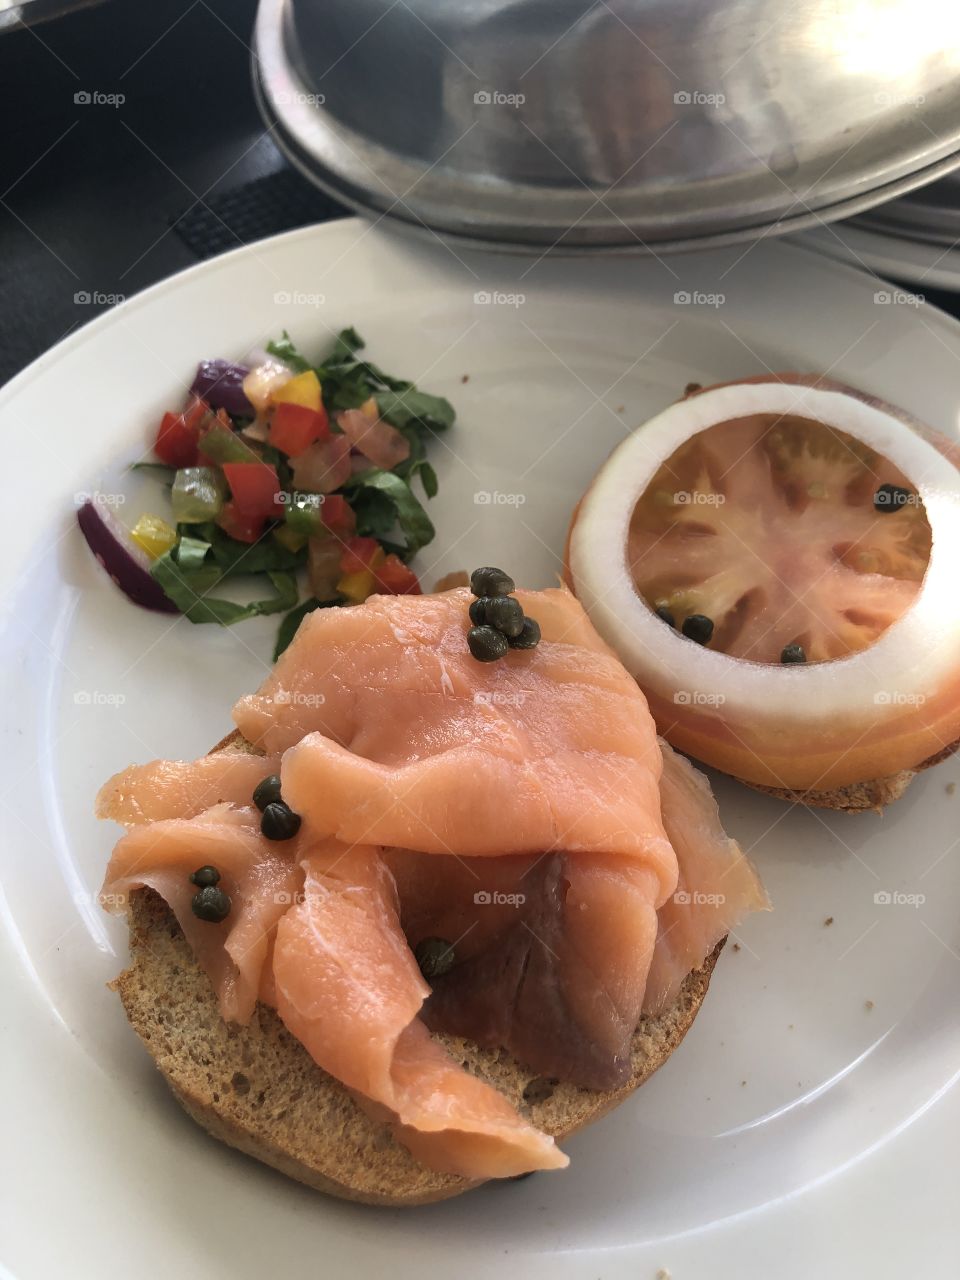 Smoked salmon over a bagel with tomatoes and onion plate 